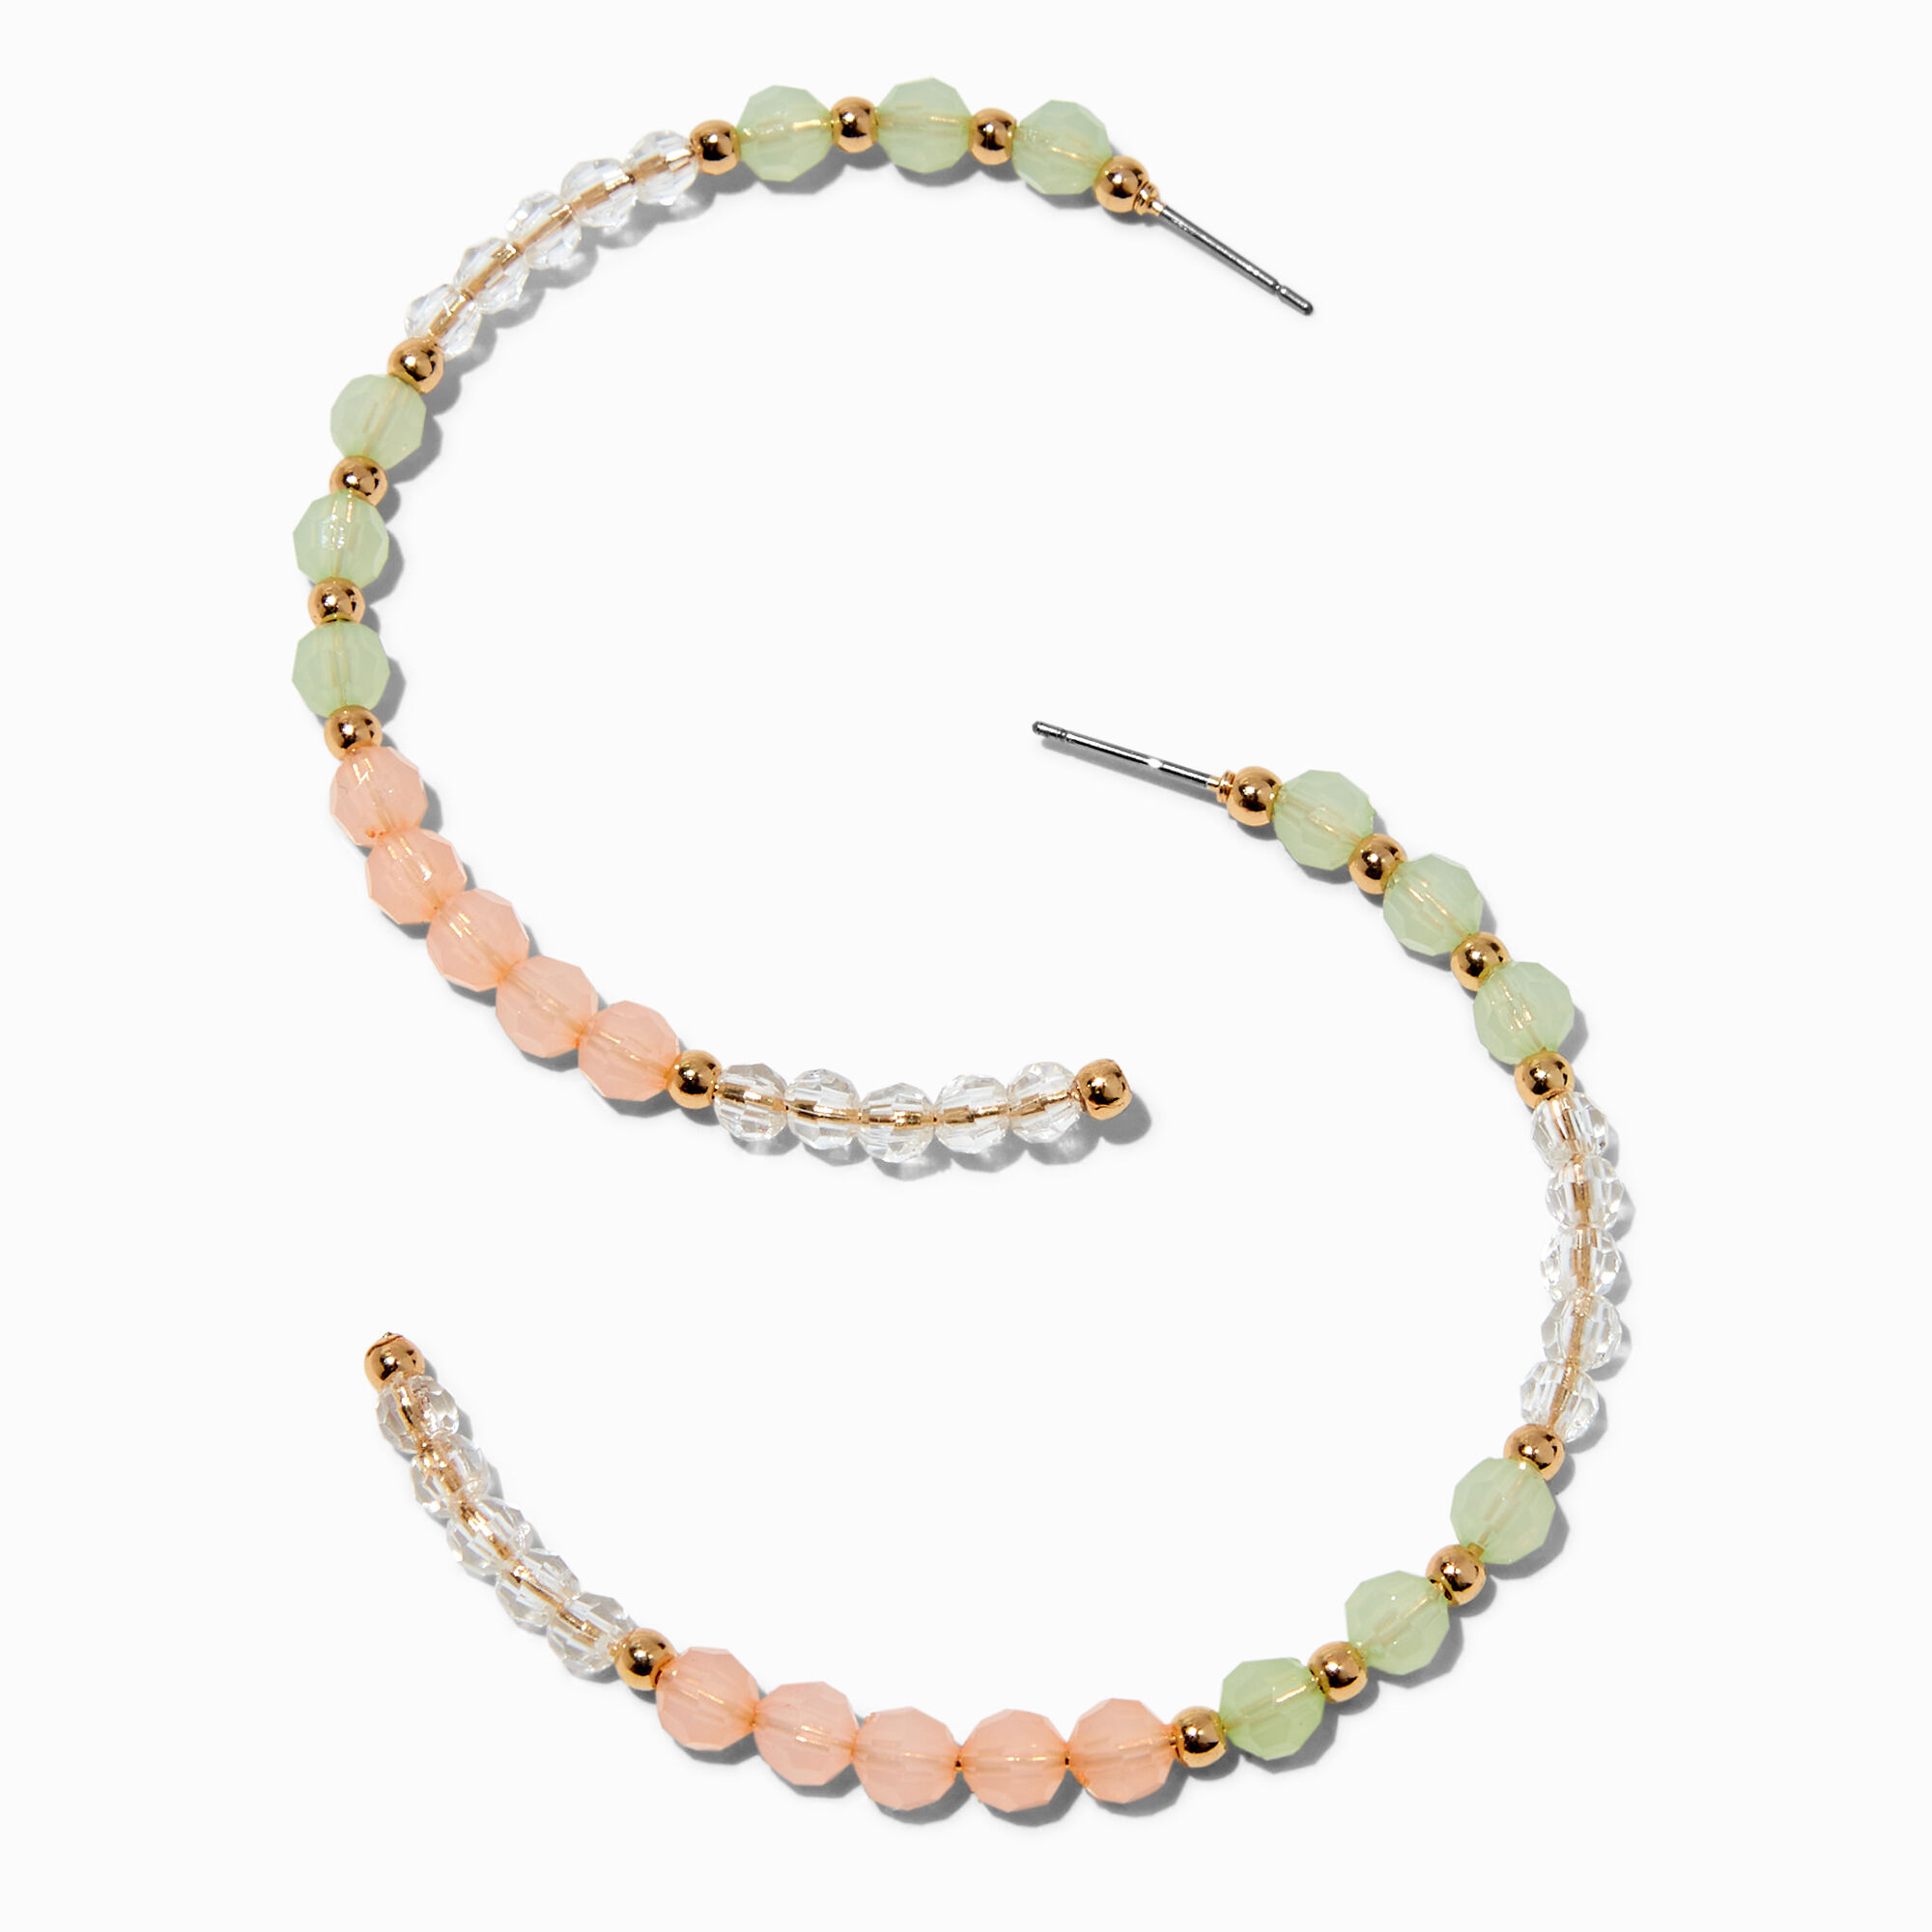 View Claires Peach Sage Beaded 60MM Hoop Earring Green information